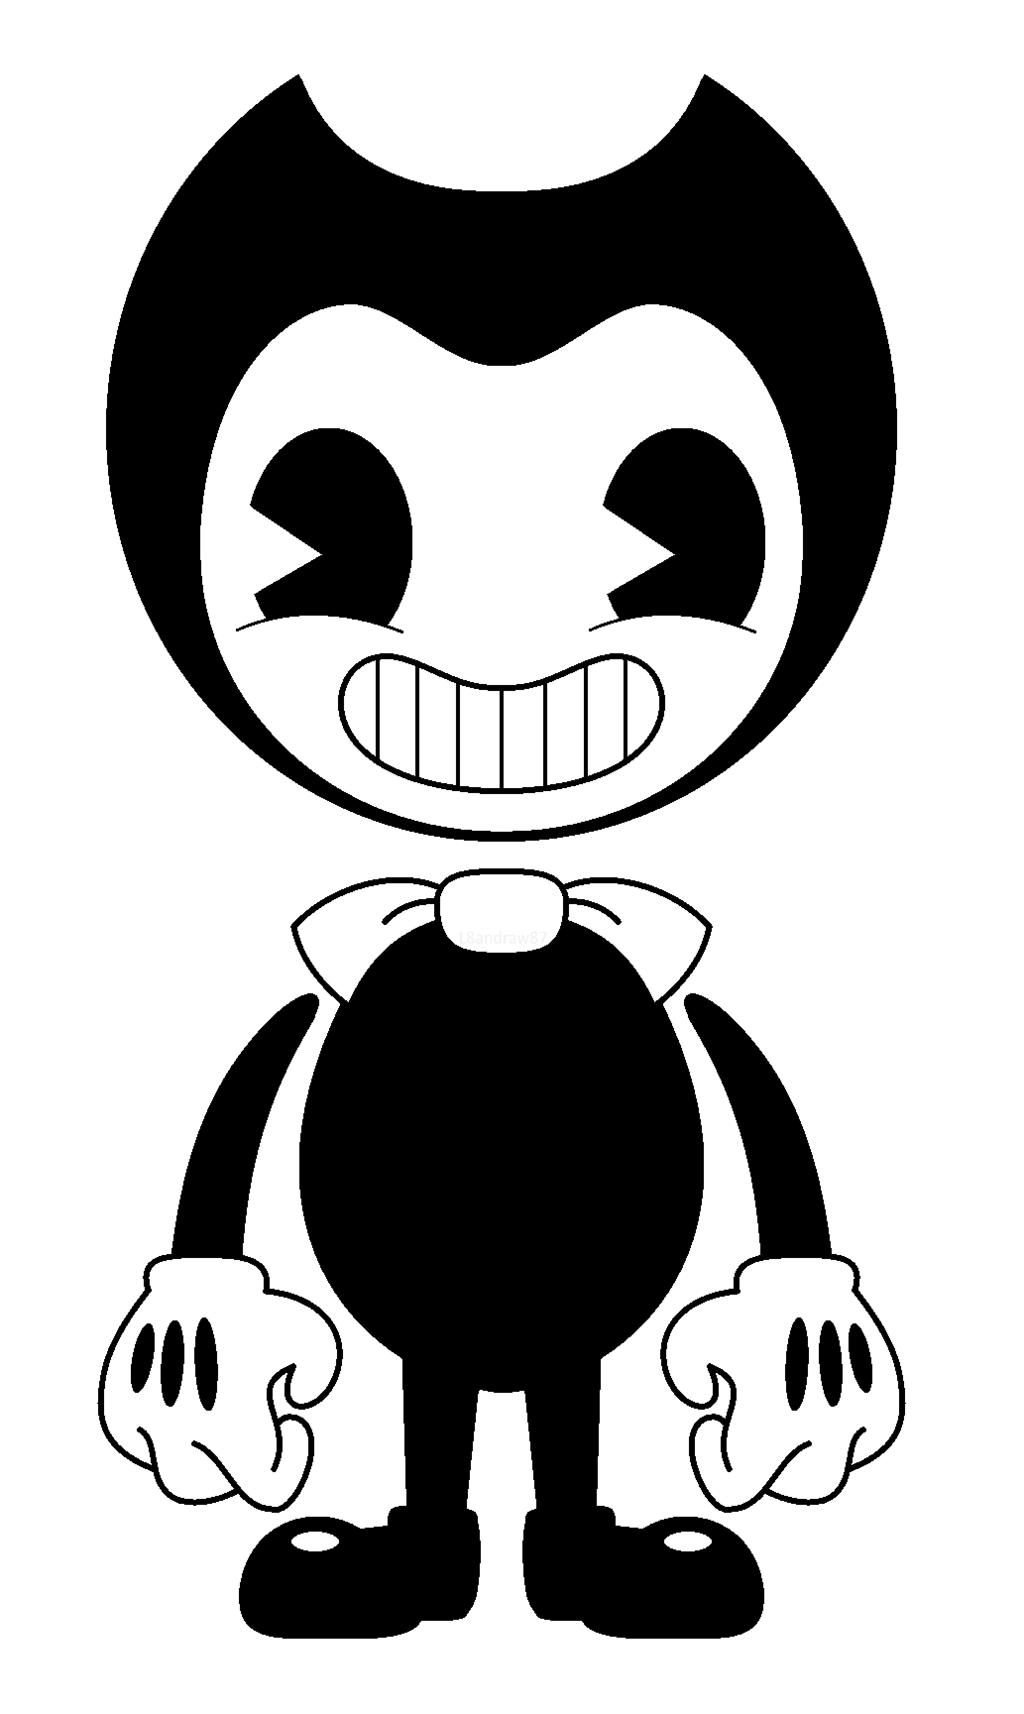 Bendy And The Ink Mashine Thing 3 Tynker - bendy bendy bendy bendy bendy bendy bendy roblox